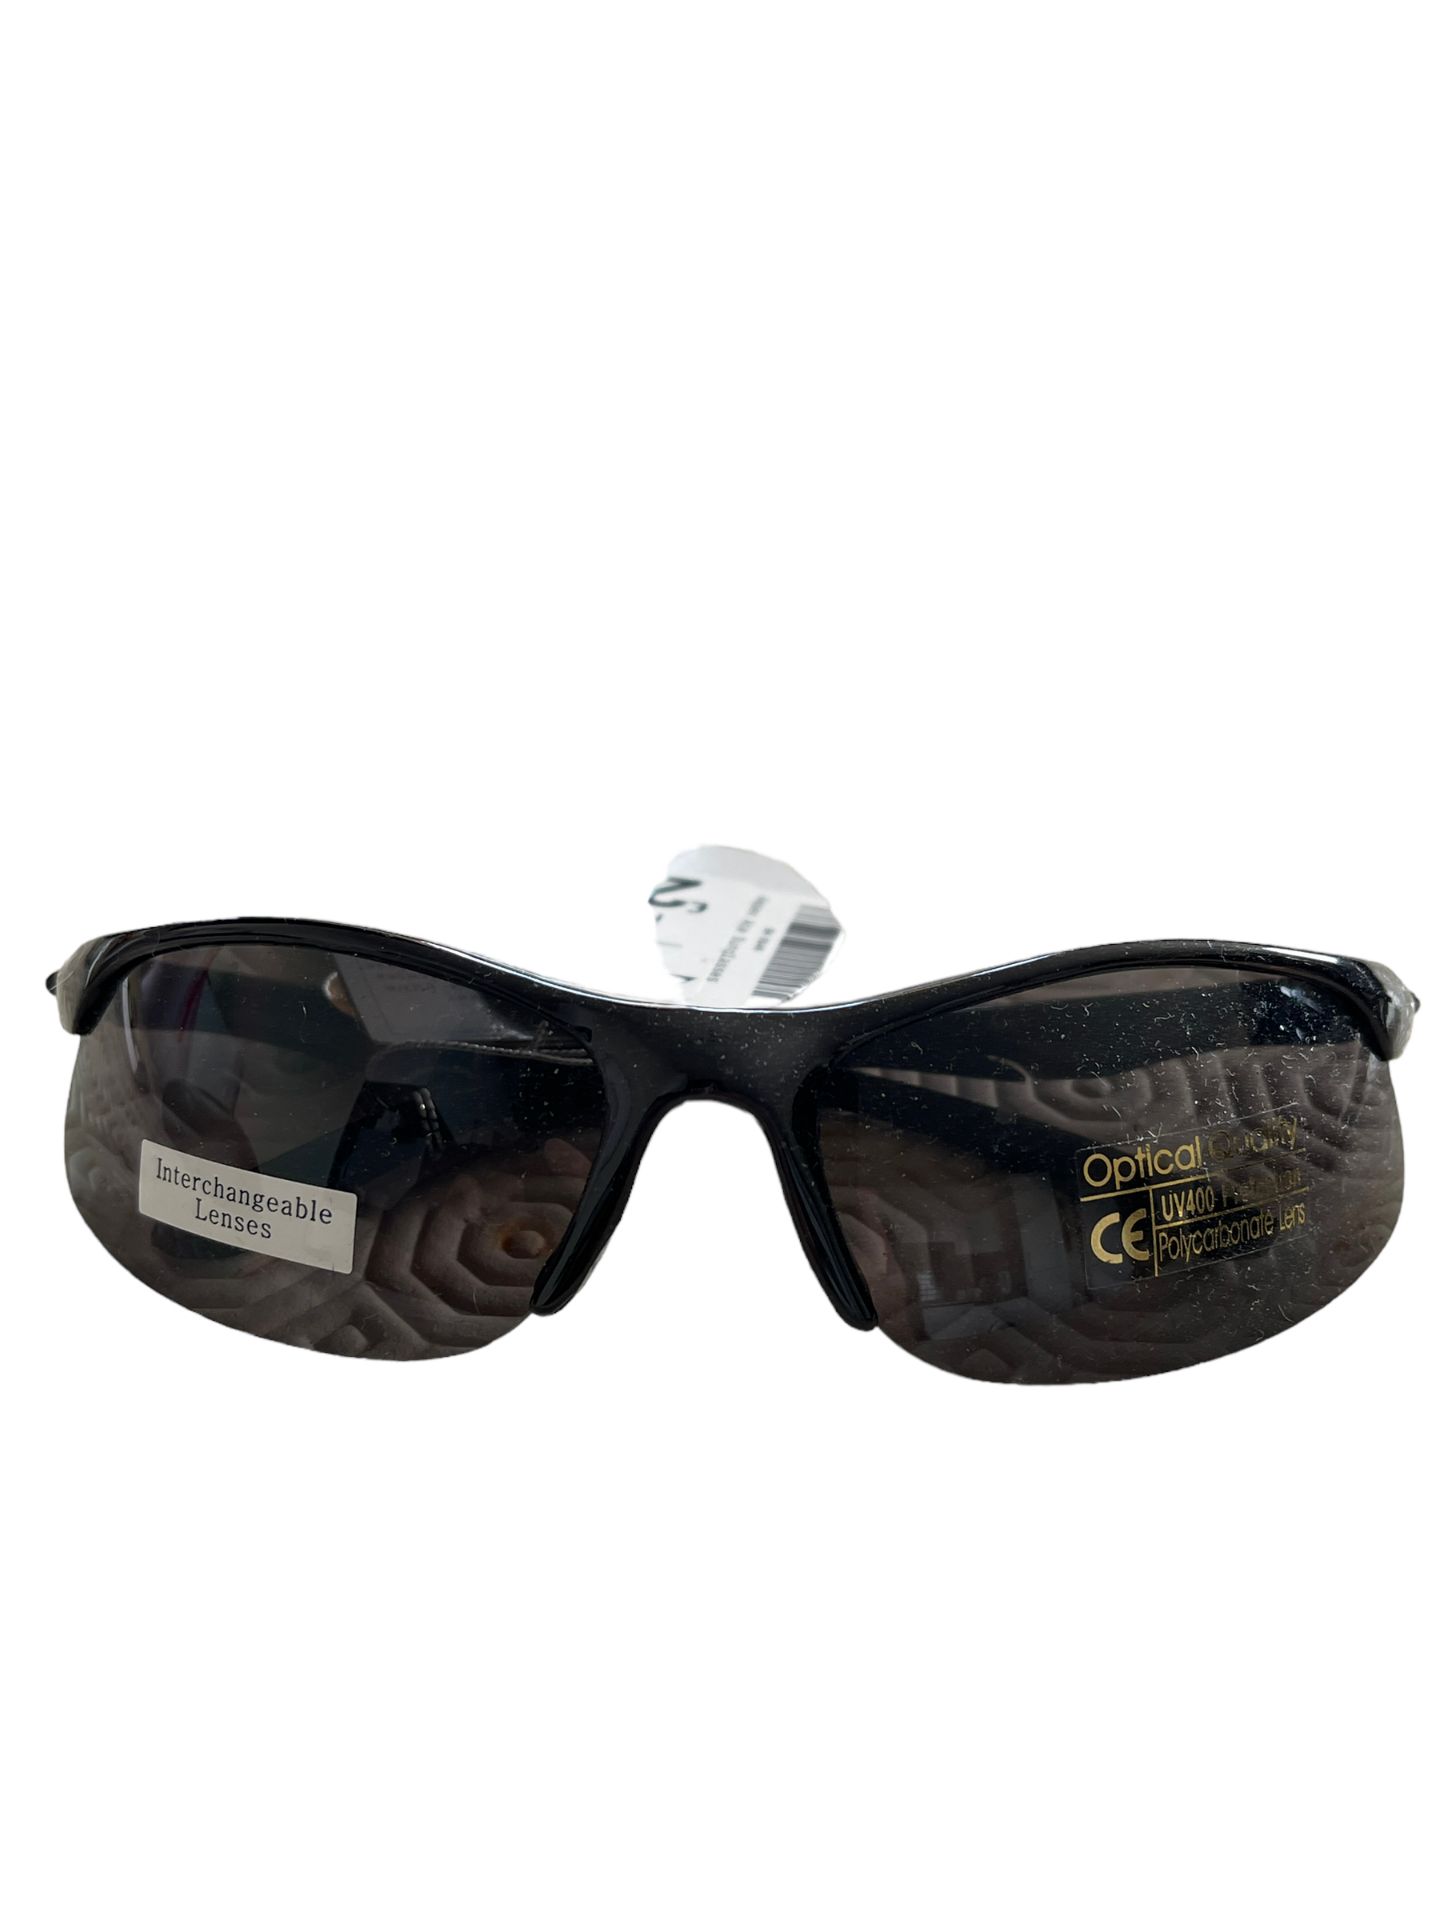 Apex Ace Glasses with case RR£38.00 surplus stock - Image 2 of 3